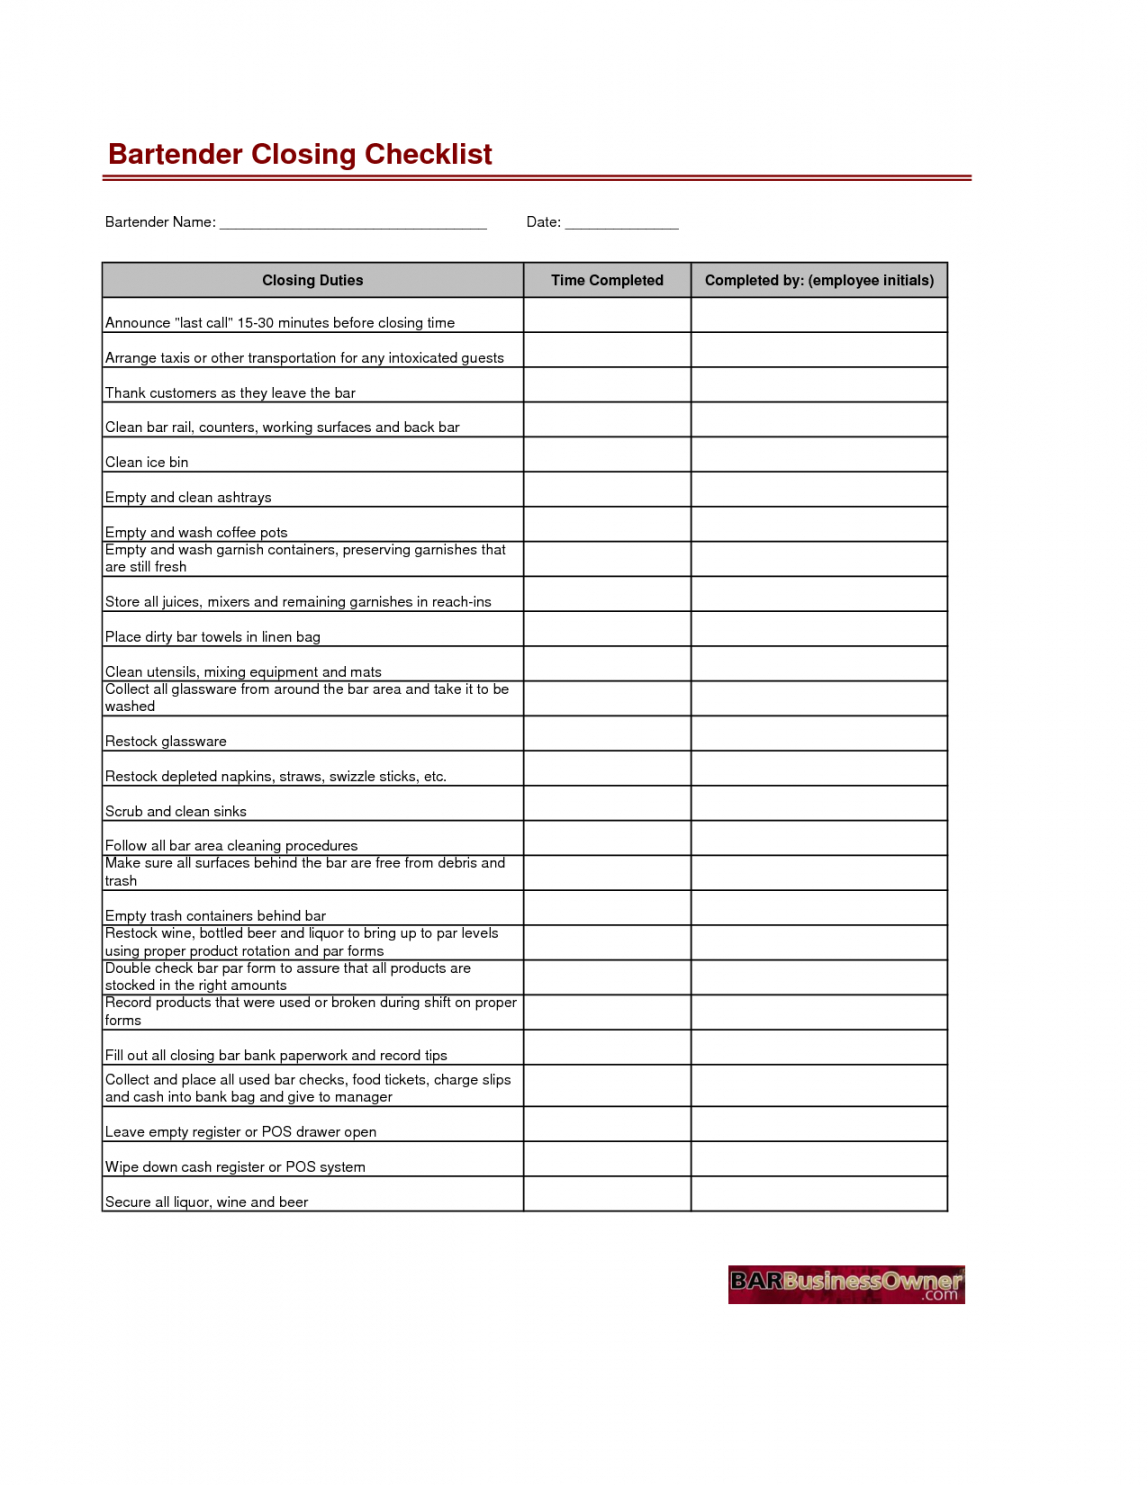 duty checklist templates  google search  workin&amp;#039; on it shift checklist template examples